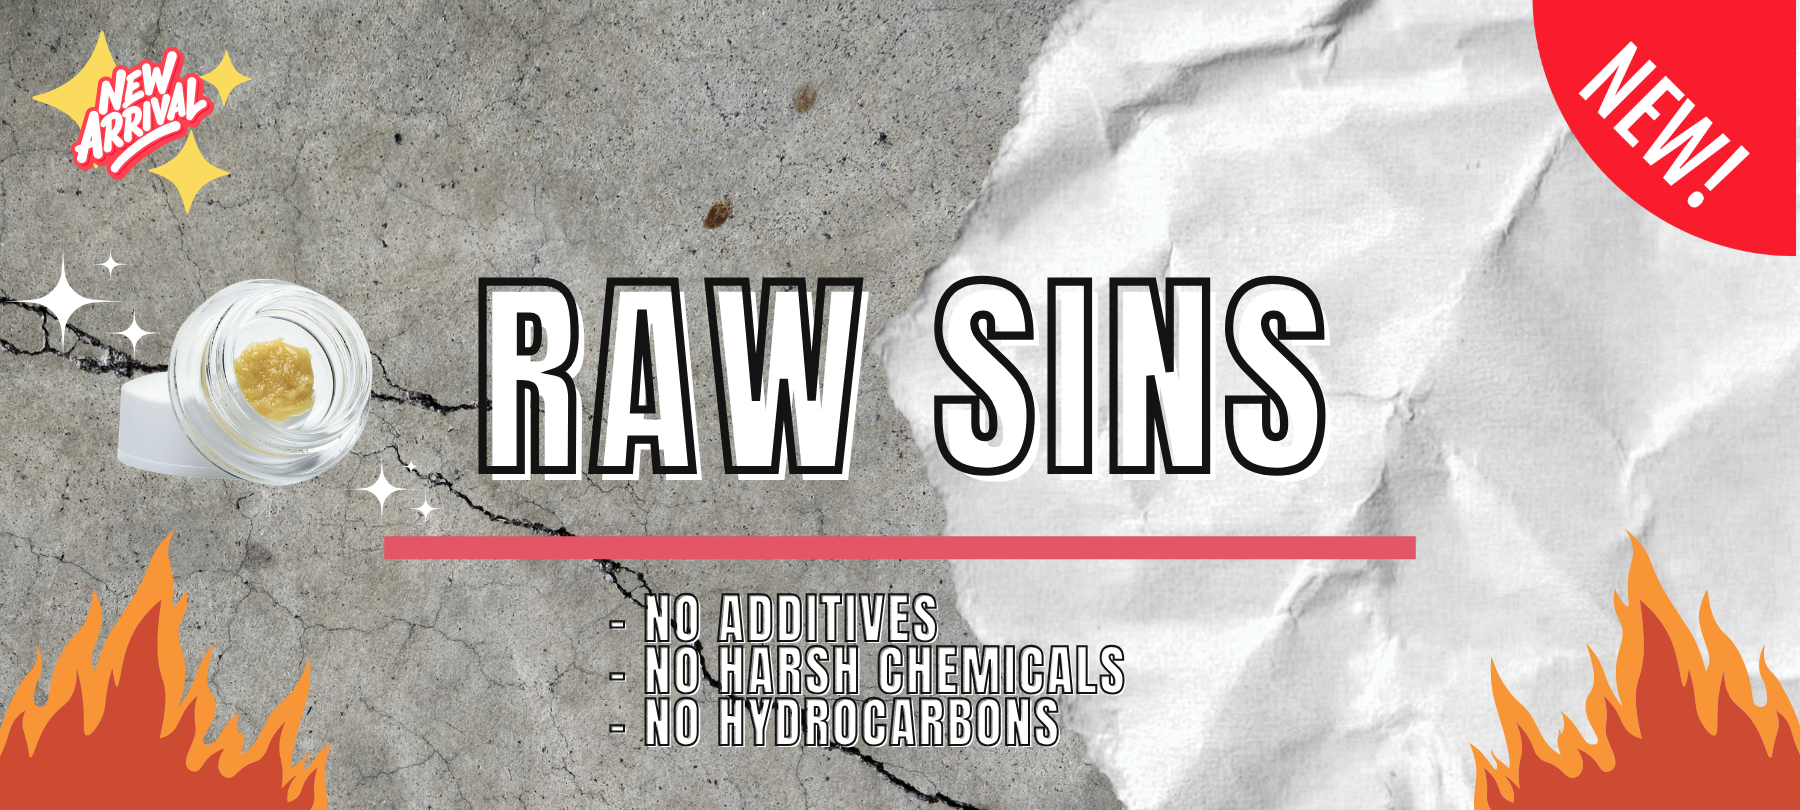 RAW SINS new to Humble Root